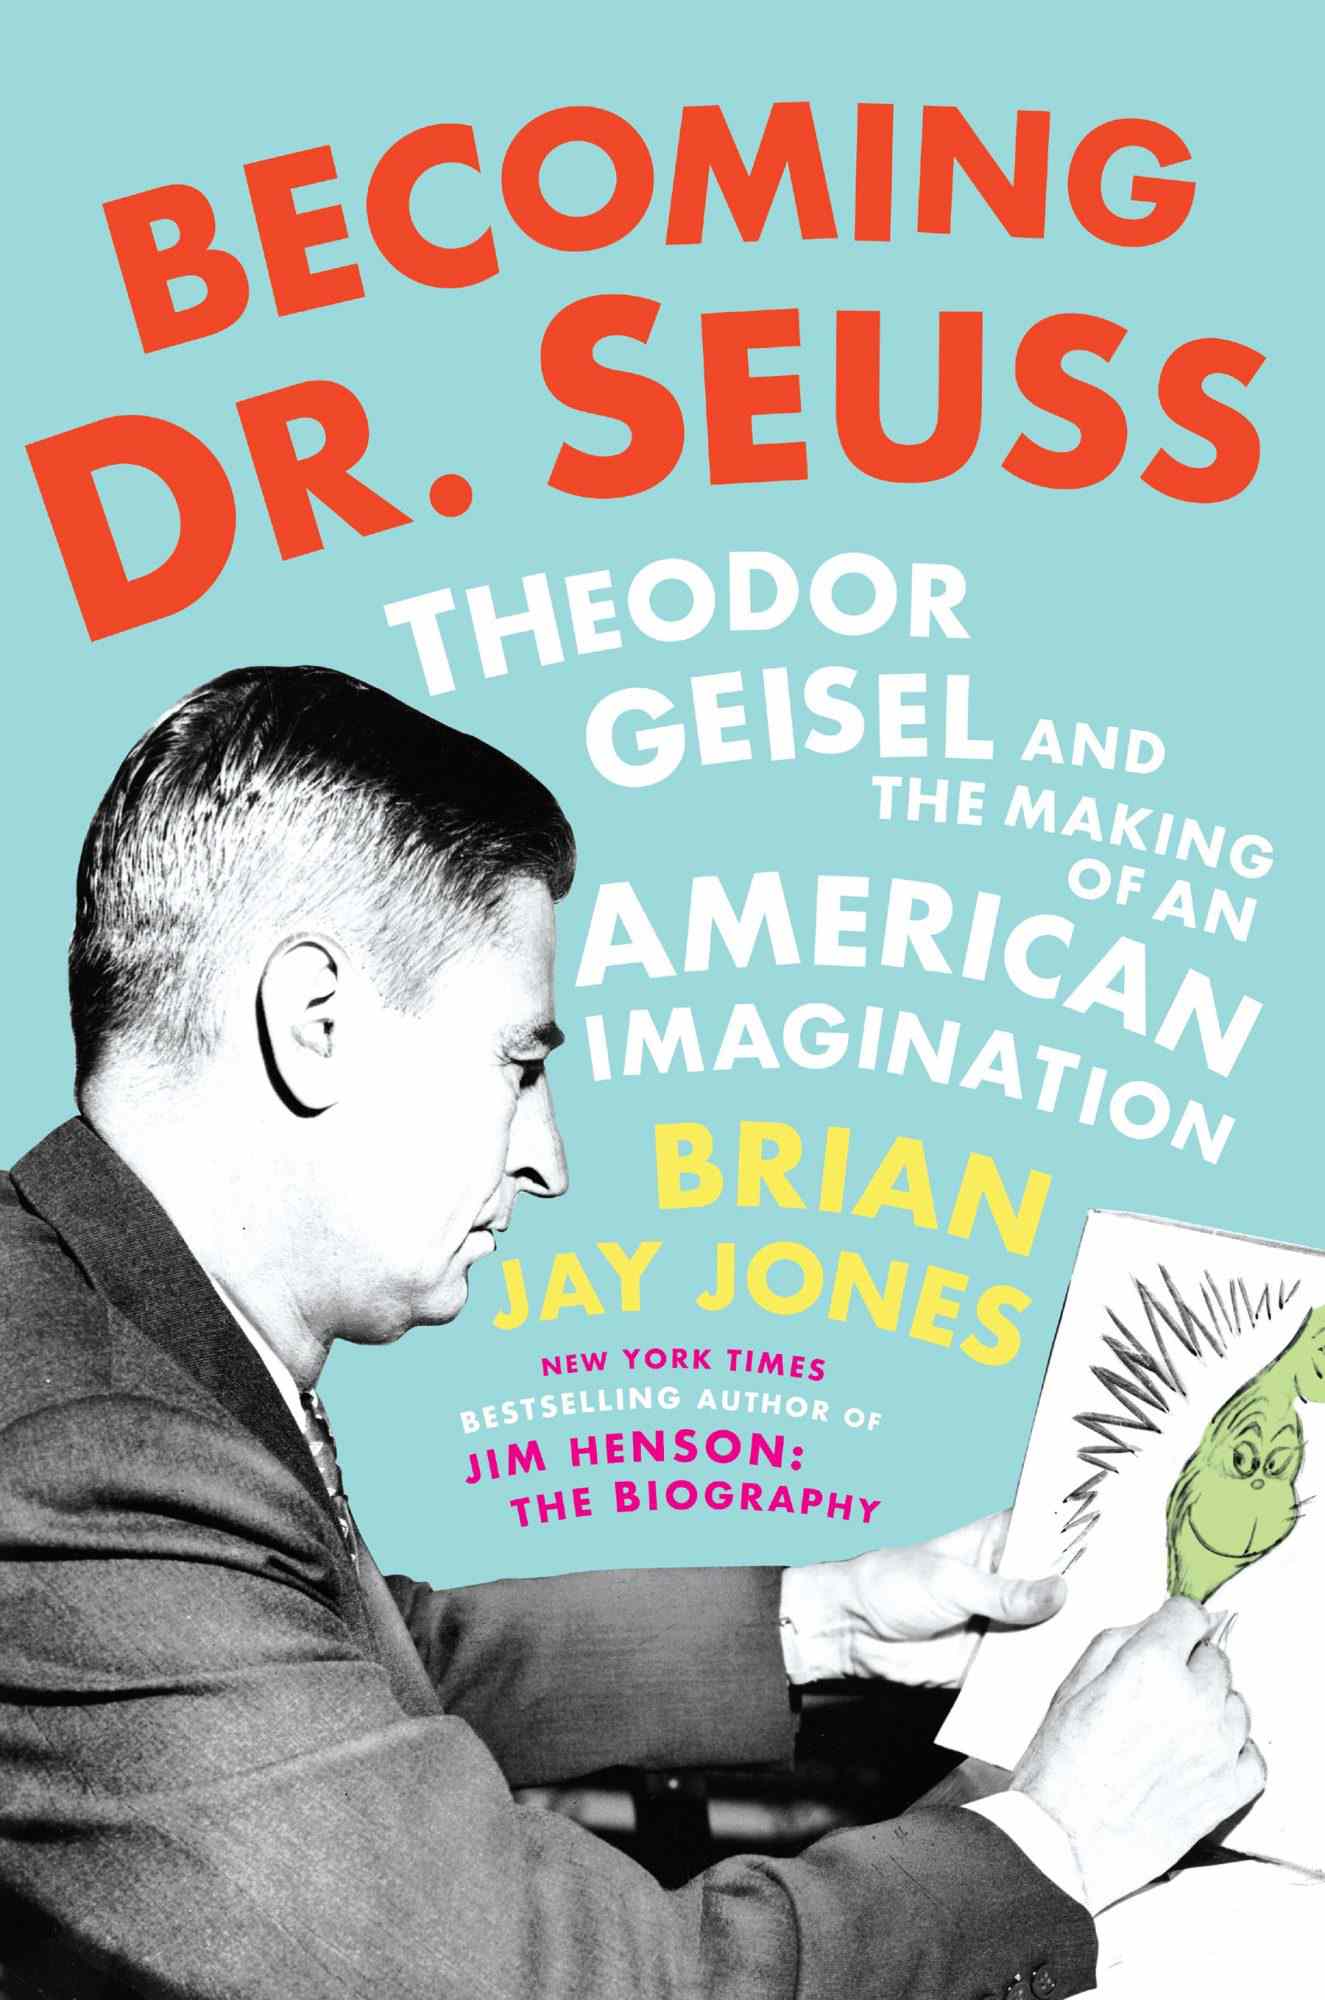 Becoming Dr. Seuss THEODOR GEISEL AND THE MAKING OF AN AMERICAN IMAGINATION By BRIAN JAY JONES CR: Penguin